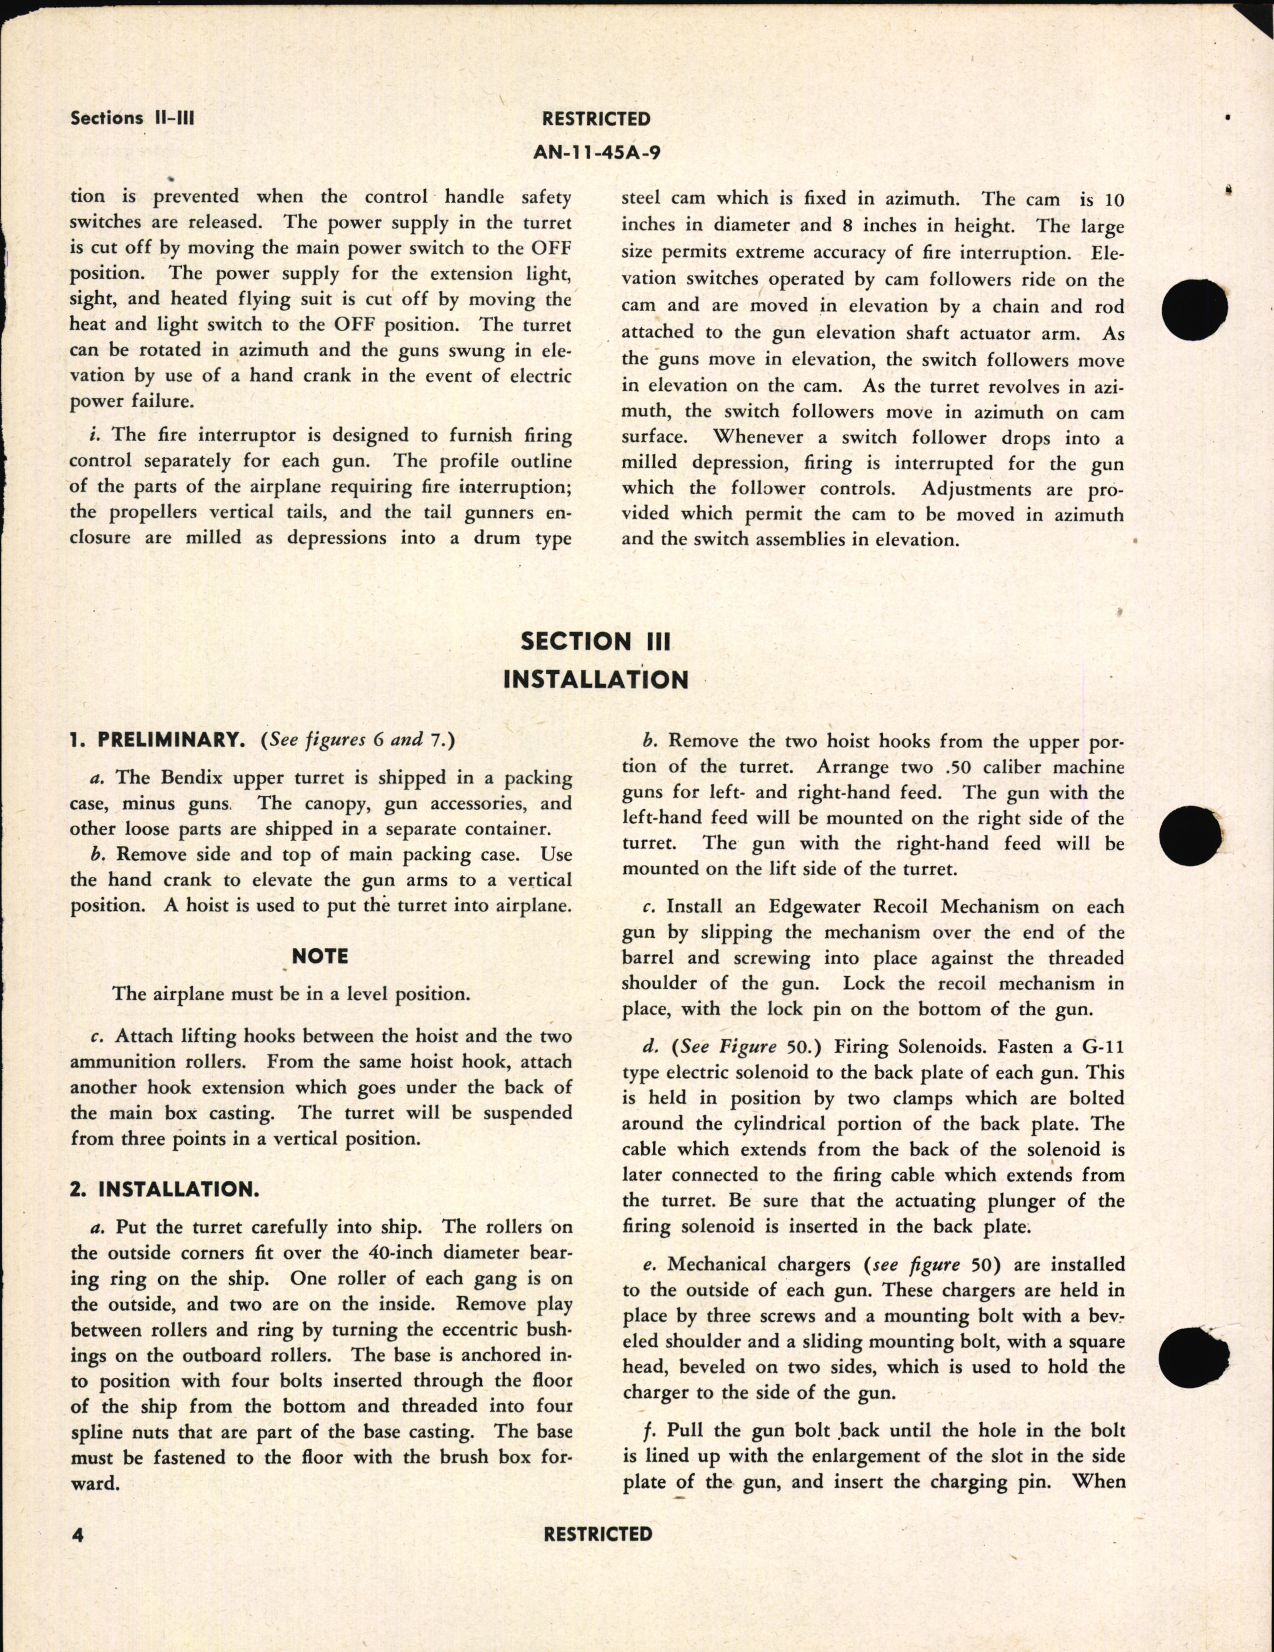 Sample page 8 from AirCorps Library document: Operation and Service Instructions for Upper Gun Turret Type A9B